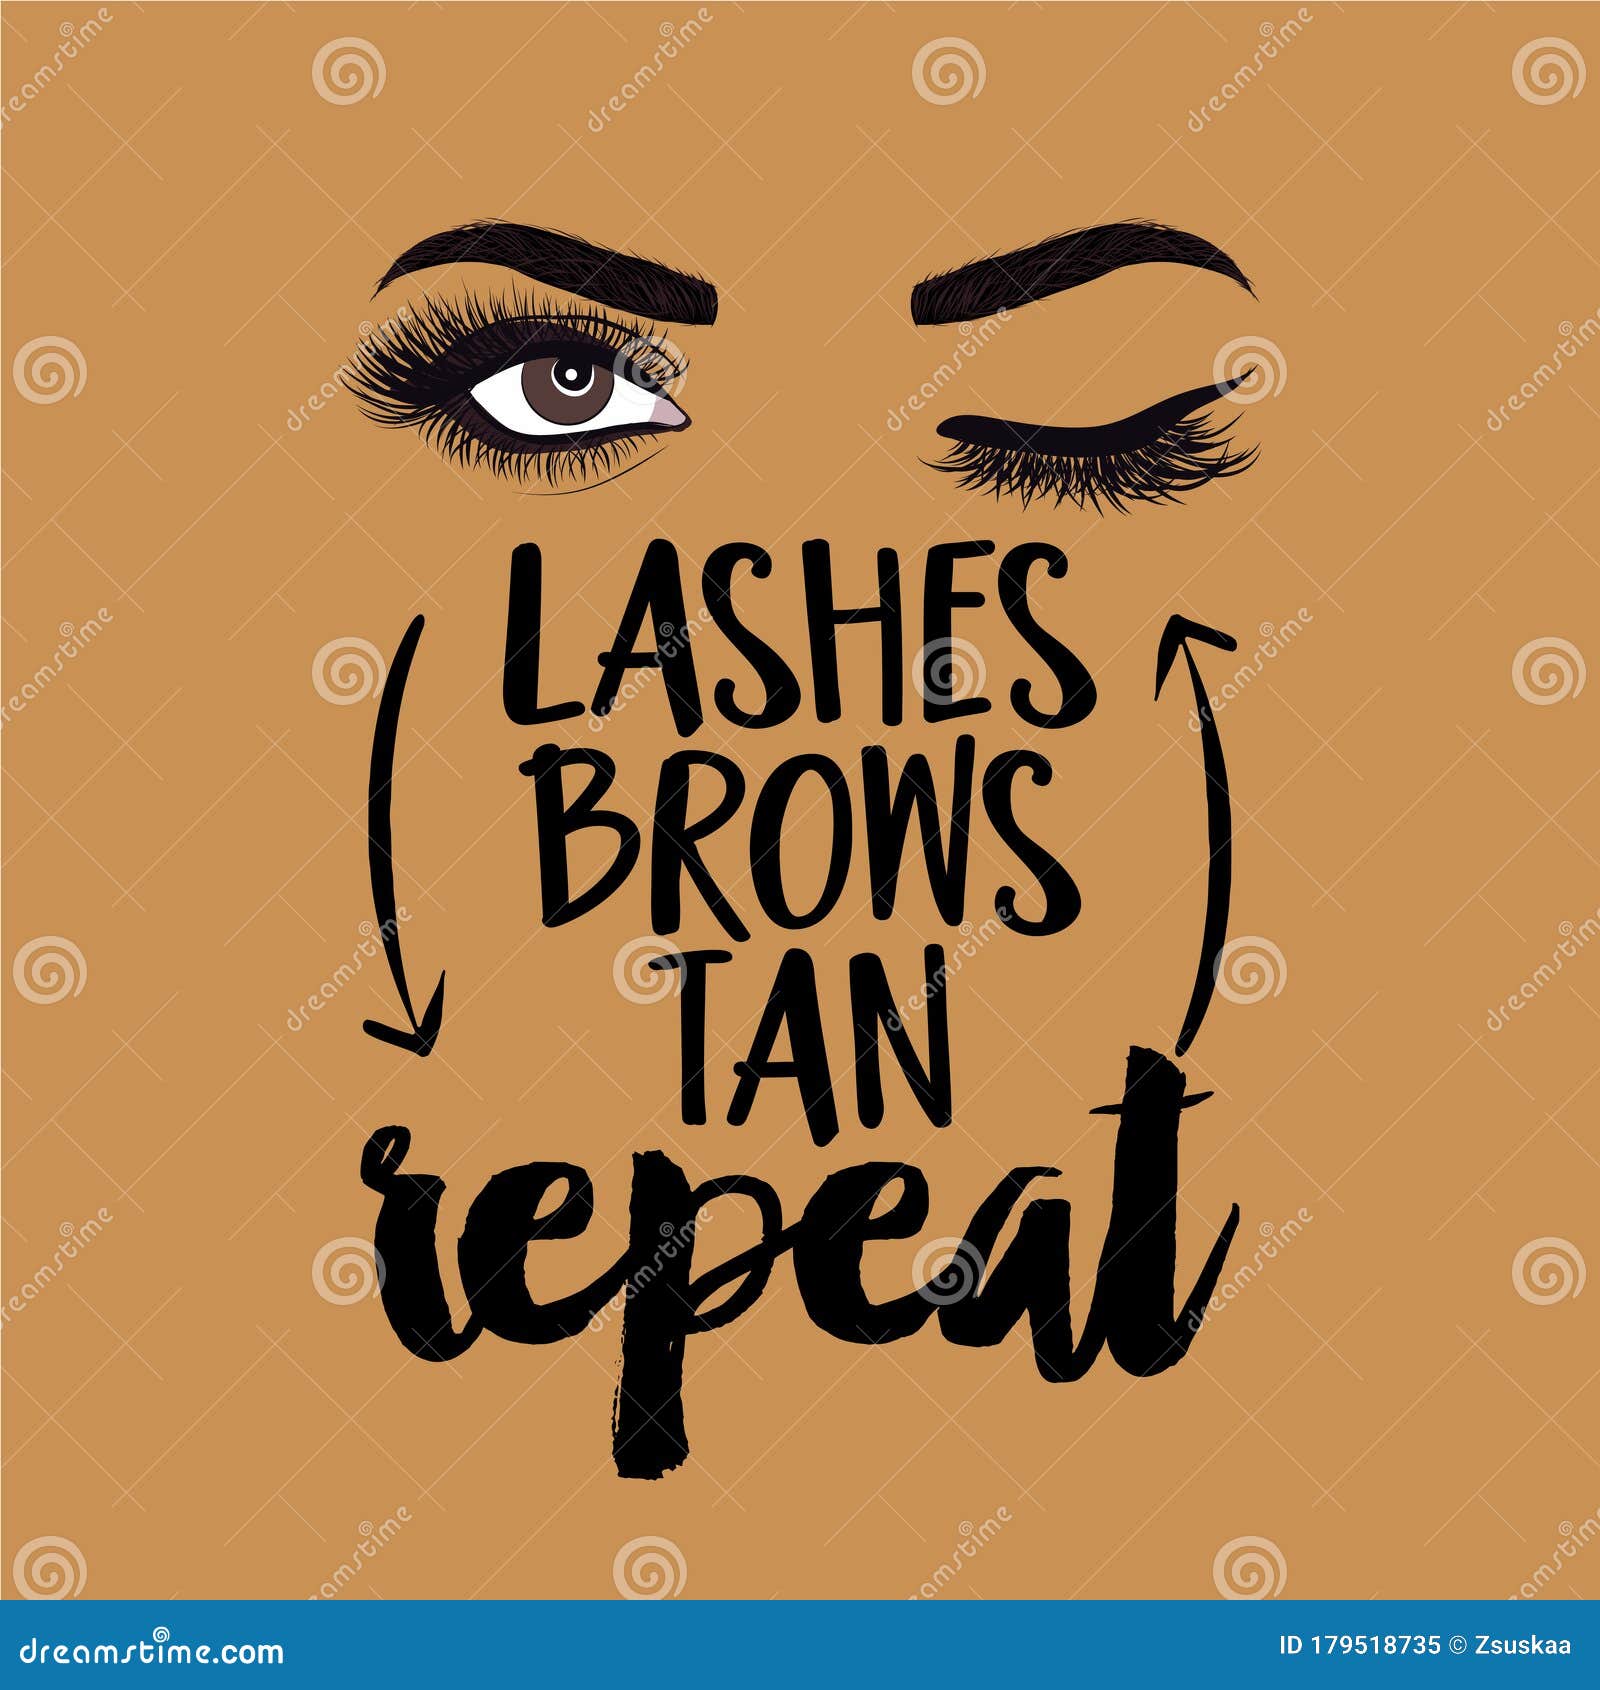 lashes brows tan repeat - beautiful typography quote